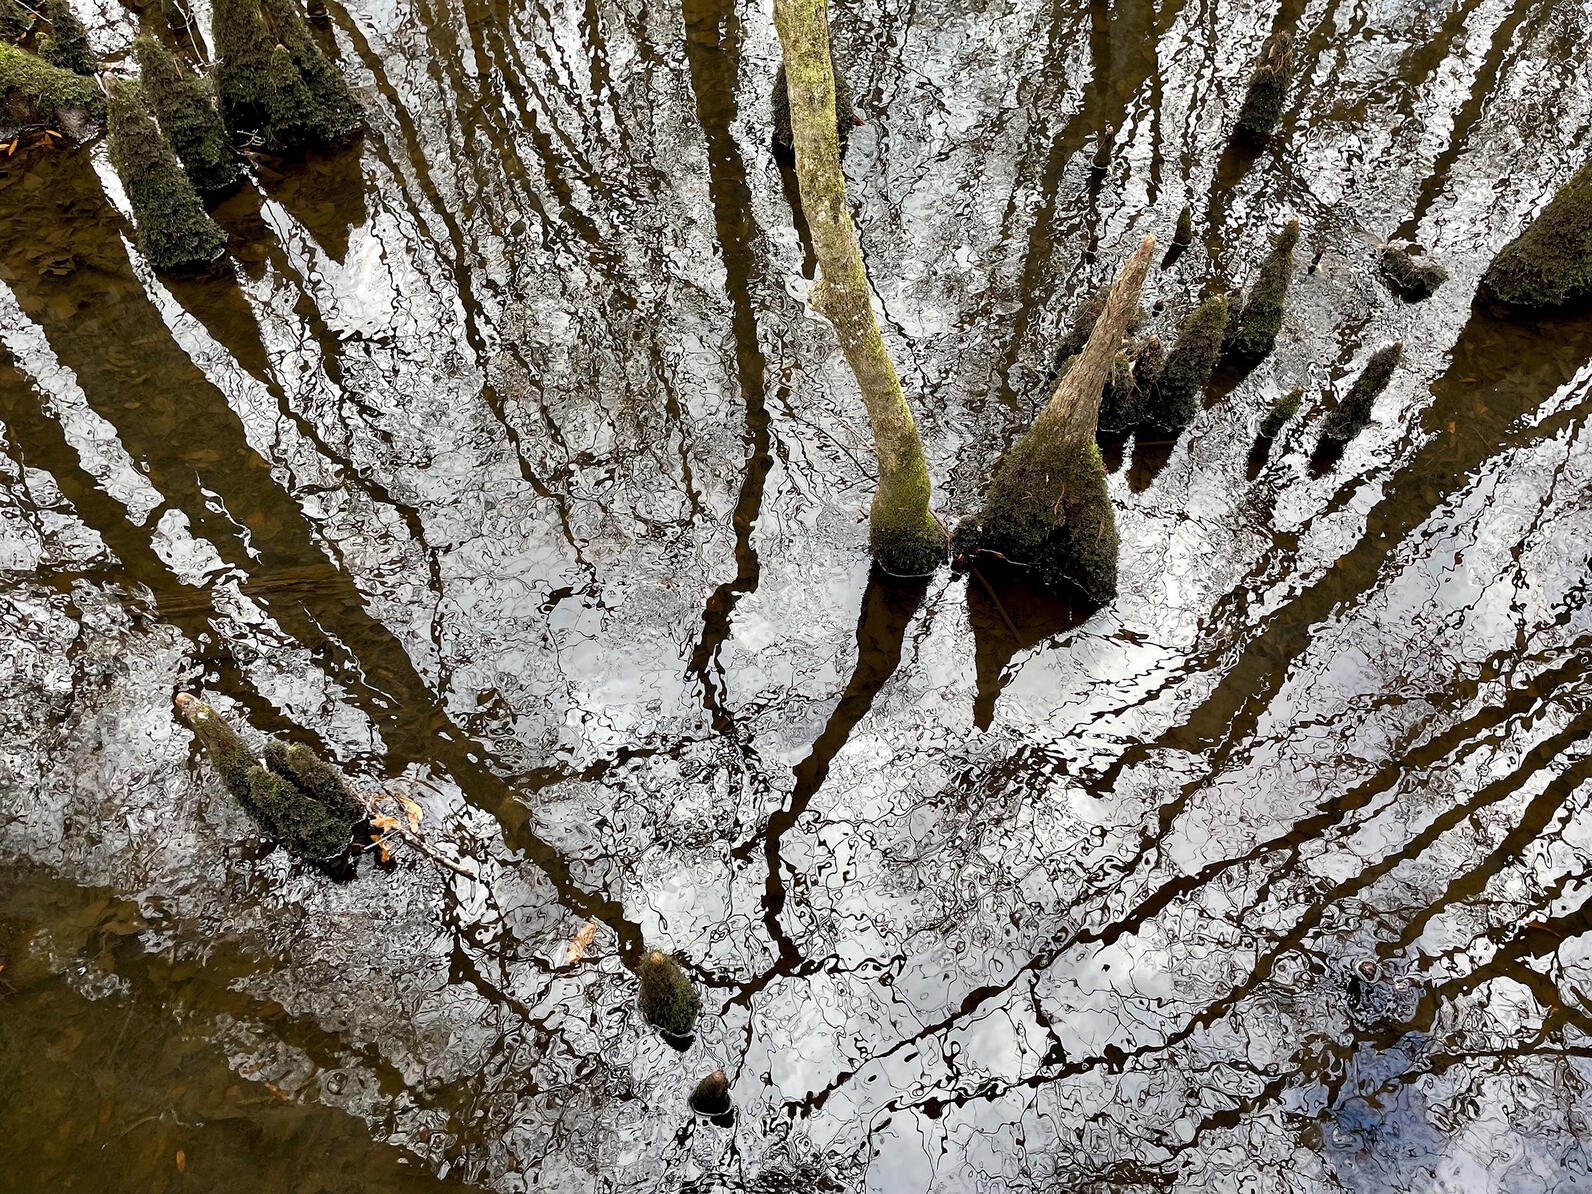 Tiny ripples in water distort a reflection of trees rising into the sky, making them appear to move at odd, varied angles like tangled hair. From the water rise a few pointed cypress knees and small trees.